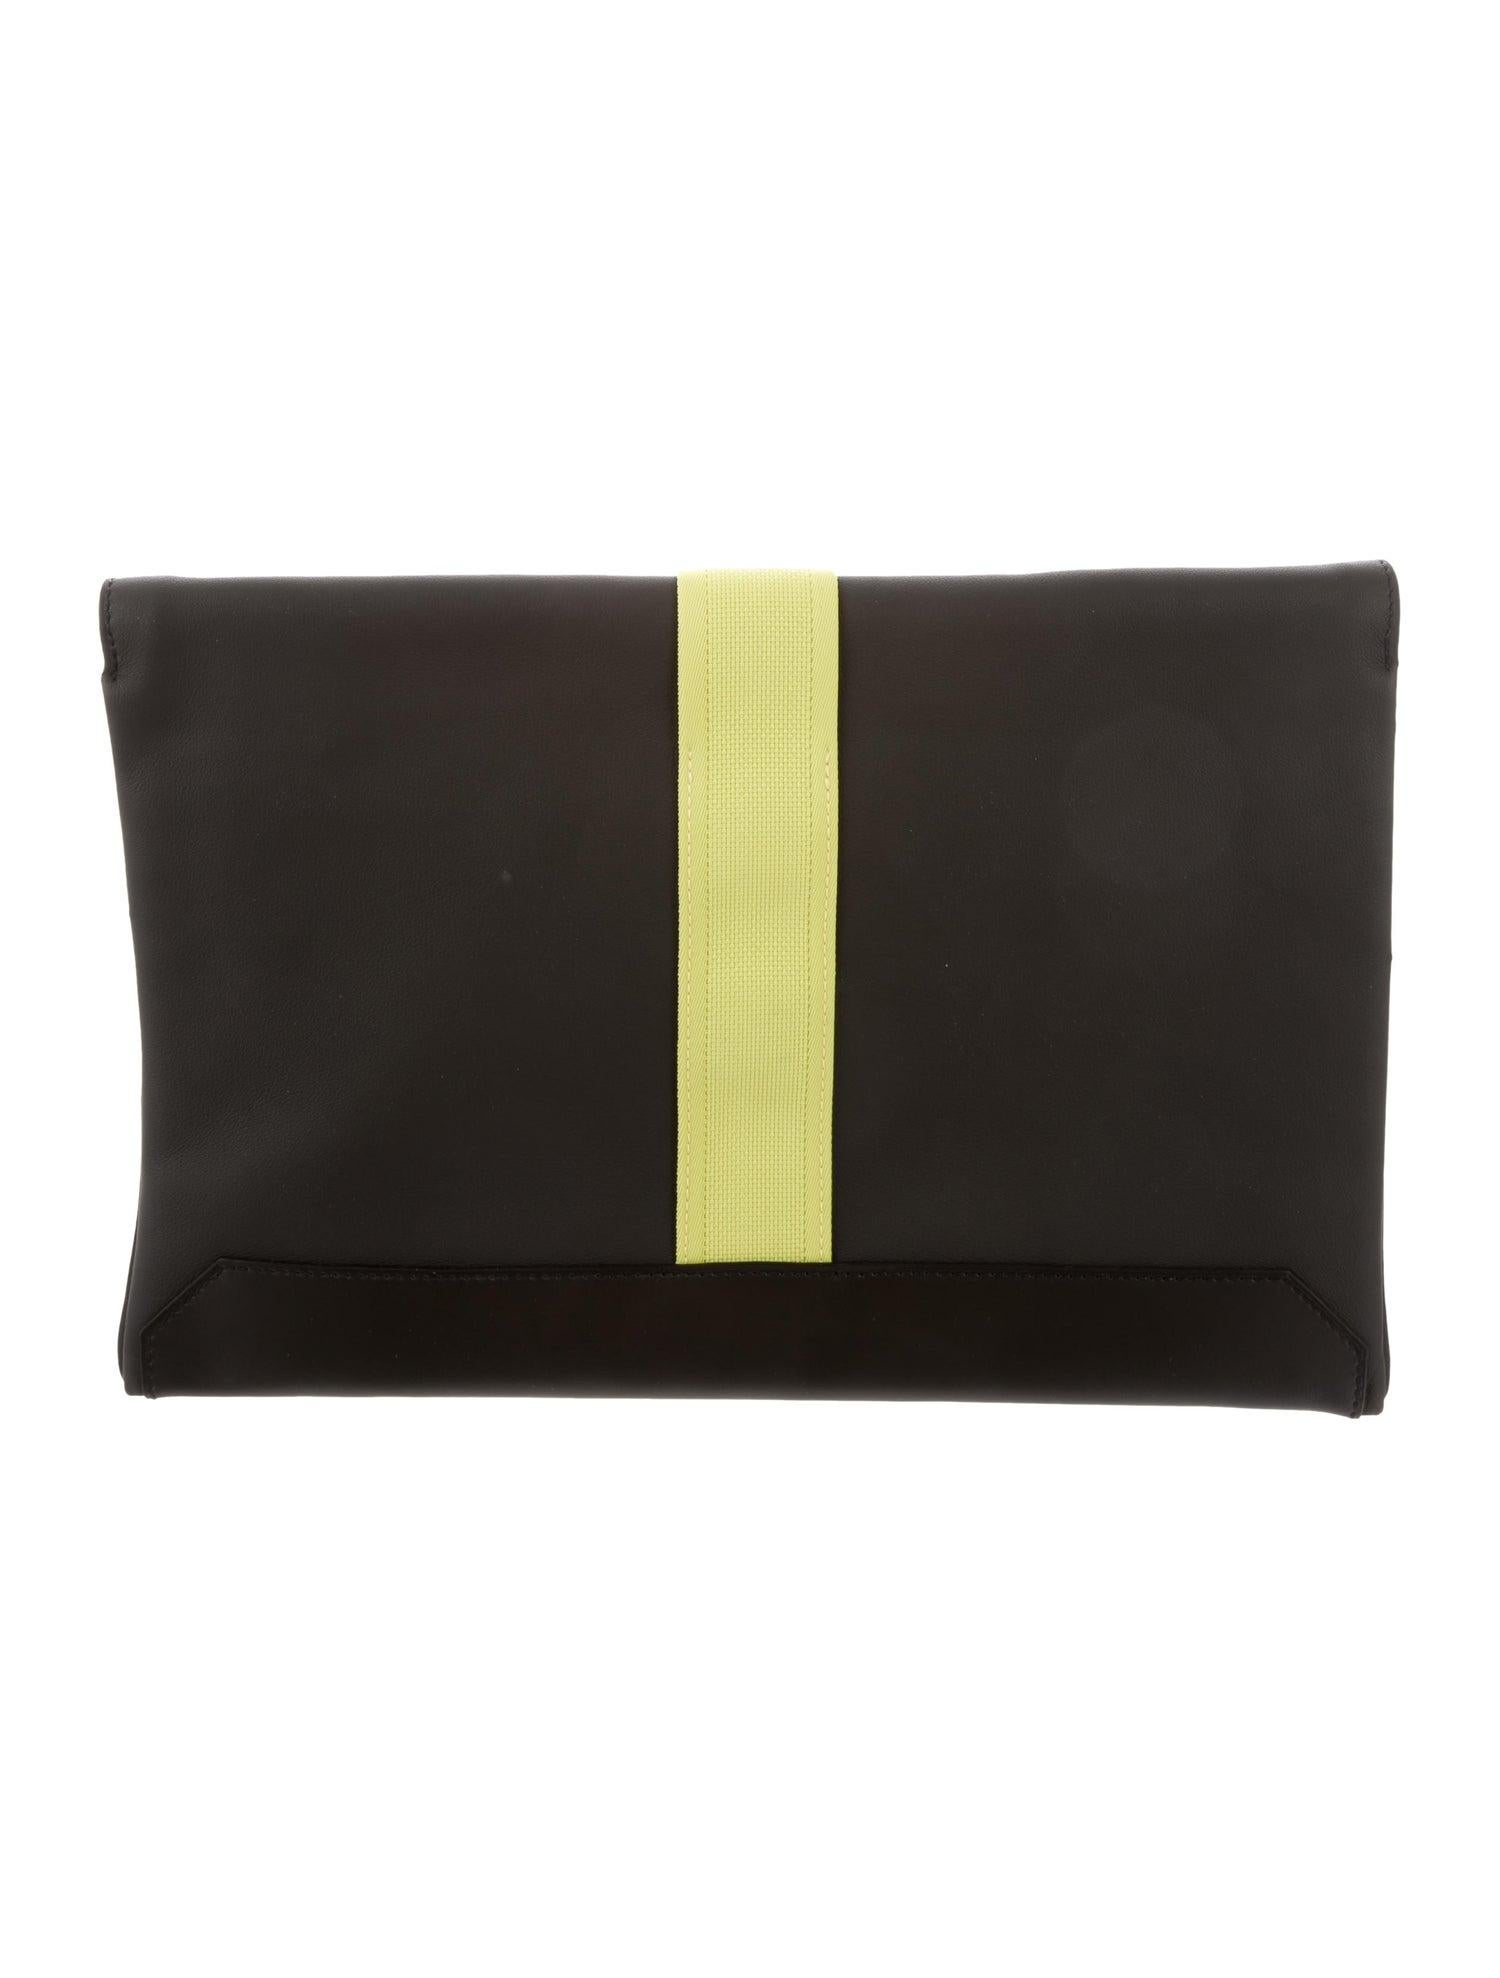 Hermes NEW Black Leather Neon Palladium Evening Envelope Clutch Flap Bag 

Leather 
Nylon
Palladium-plated hardware
Nylon lining
Hook-and-eye closure
Date code present
Made in France
Measures 13